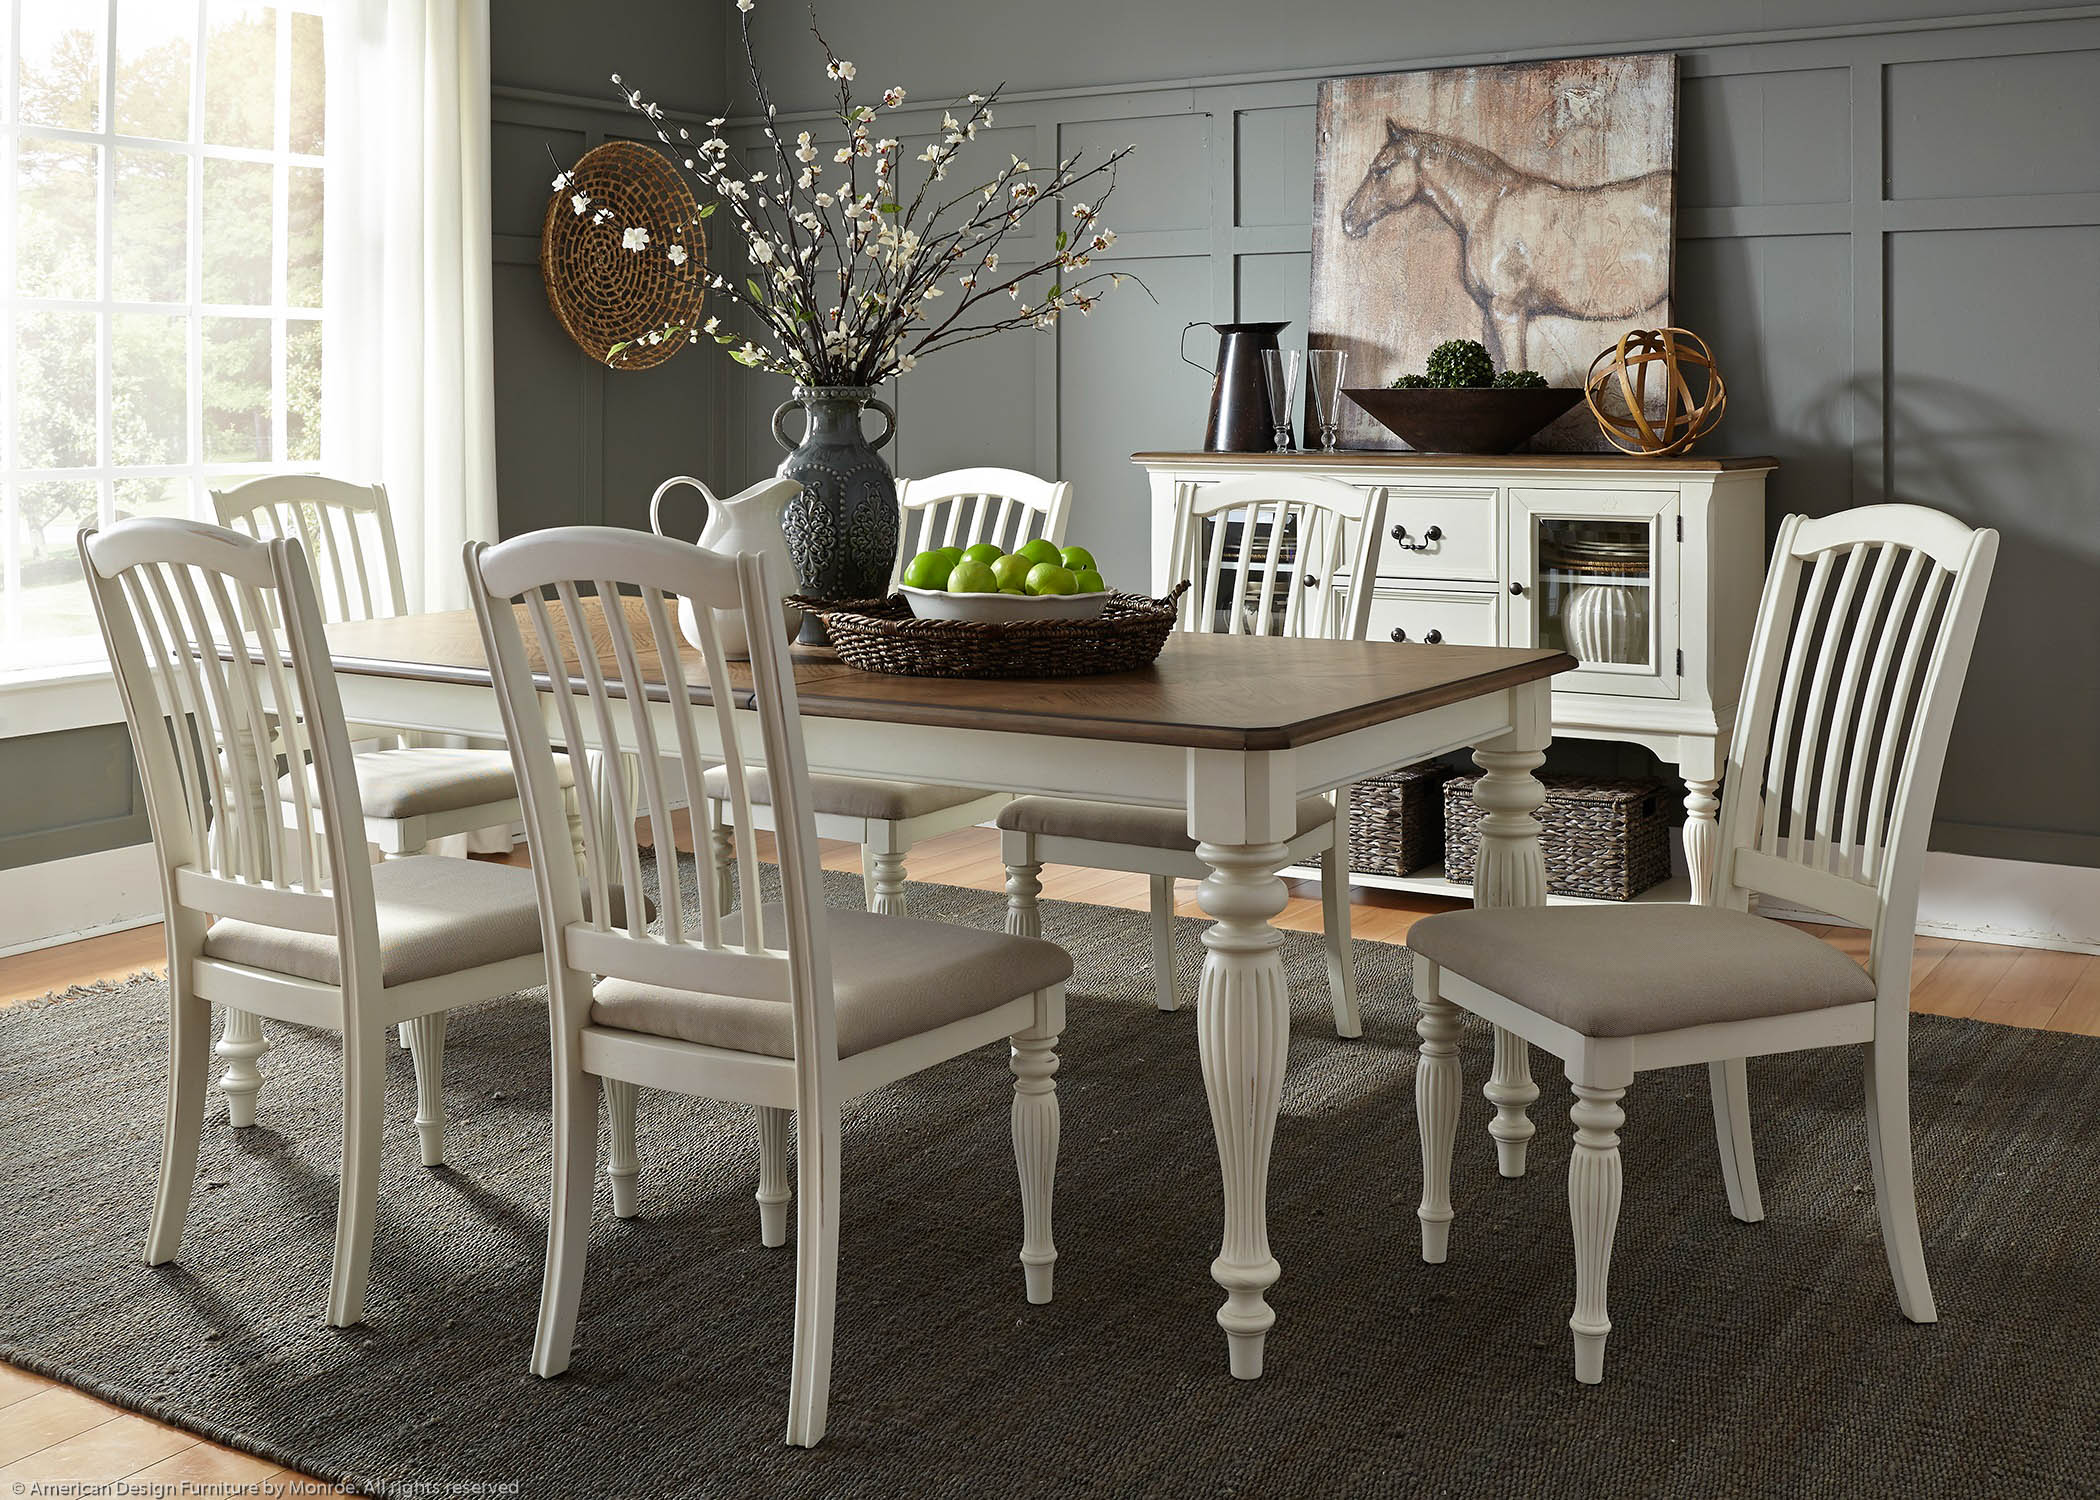 American Design Furniture by Monroe - Windy Hill Dining Set